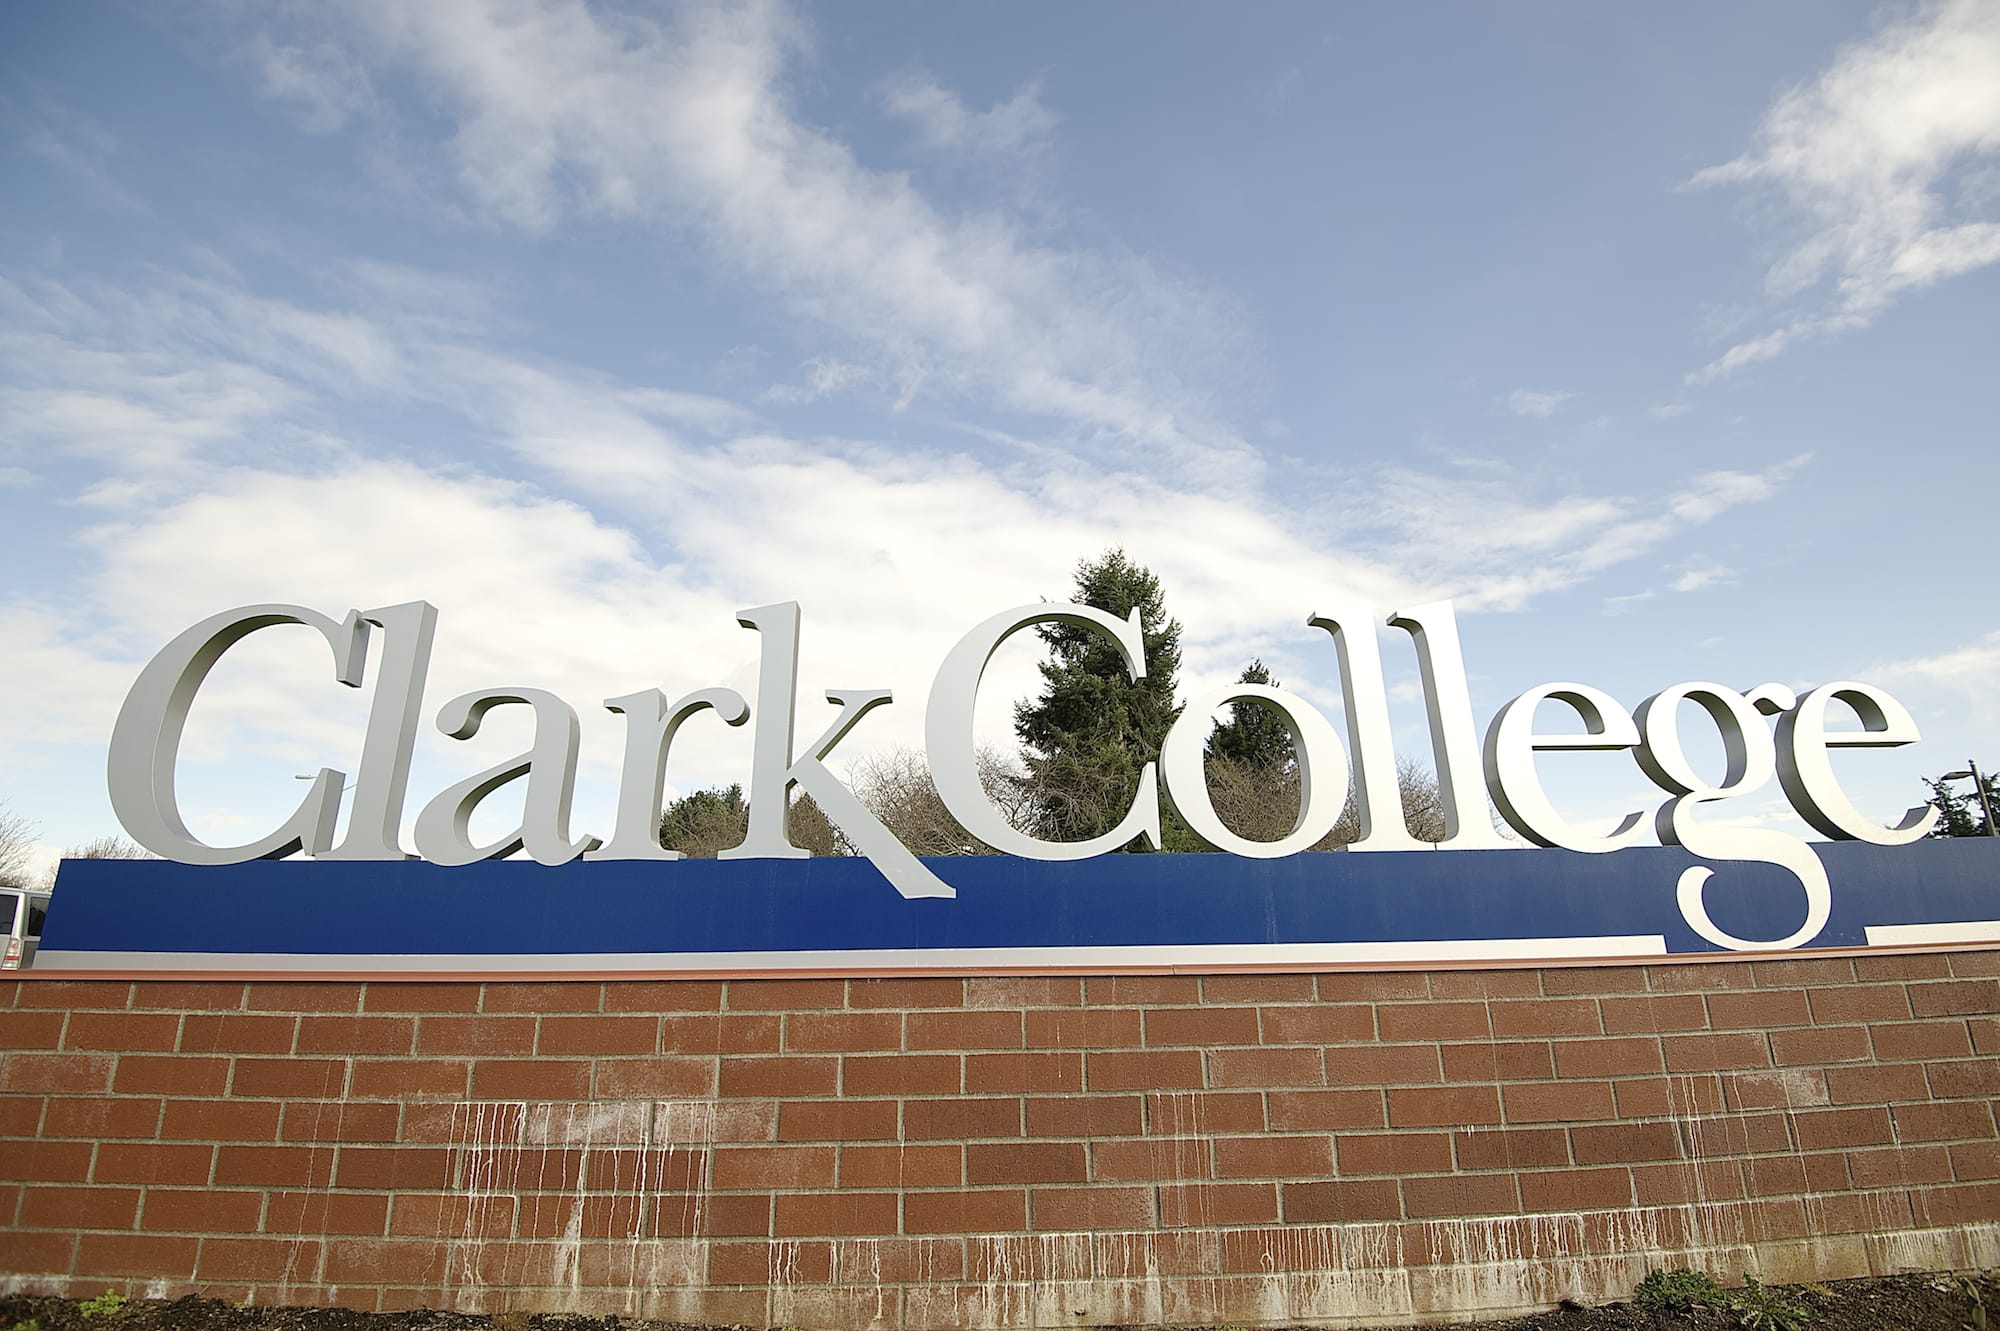 Clark College briefly went into an emergency lockdown Friday afternoon after a man called 911 to report that he was armed and had killed two police officers on campus, according to the Vancouver Police Department. The suspect was not armed, and no officers or civilians were injured.